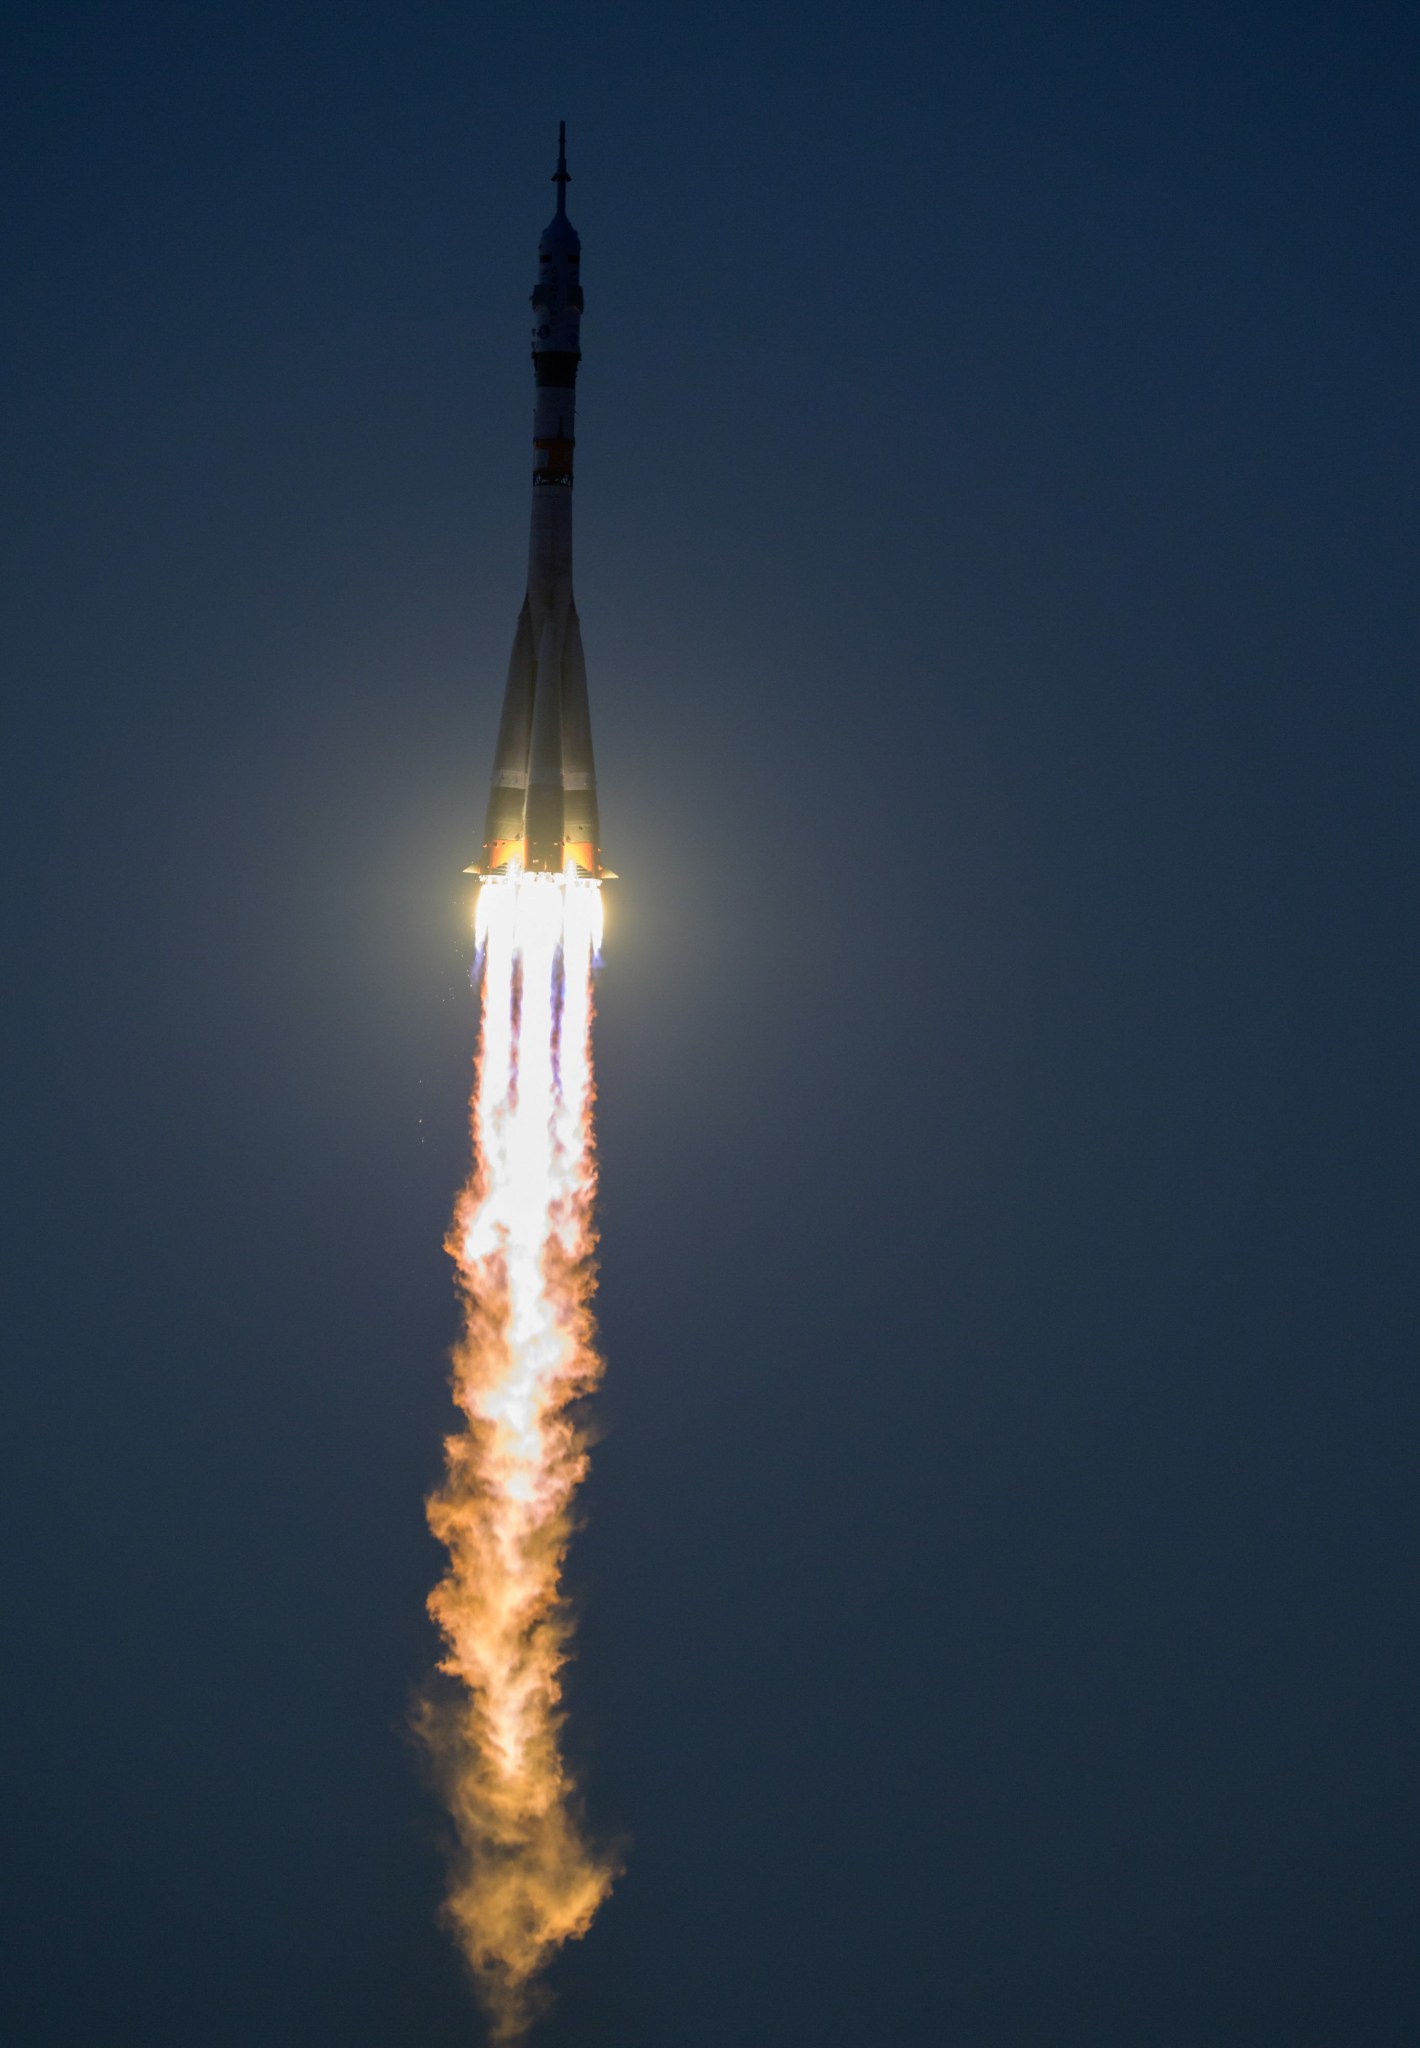 The Soyuz MS-22 rocket launches to the International Space Station